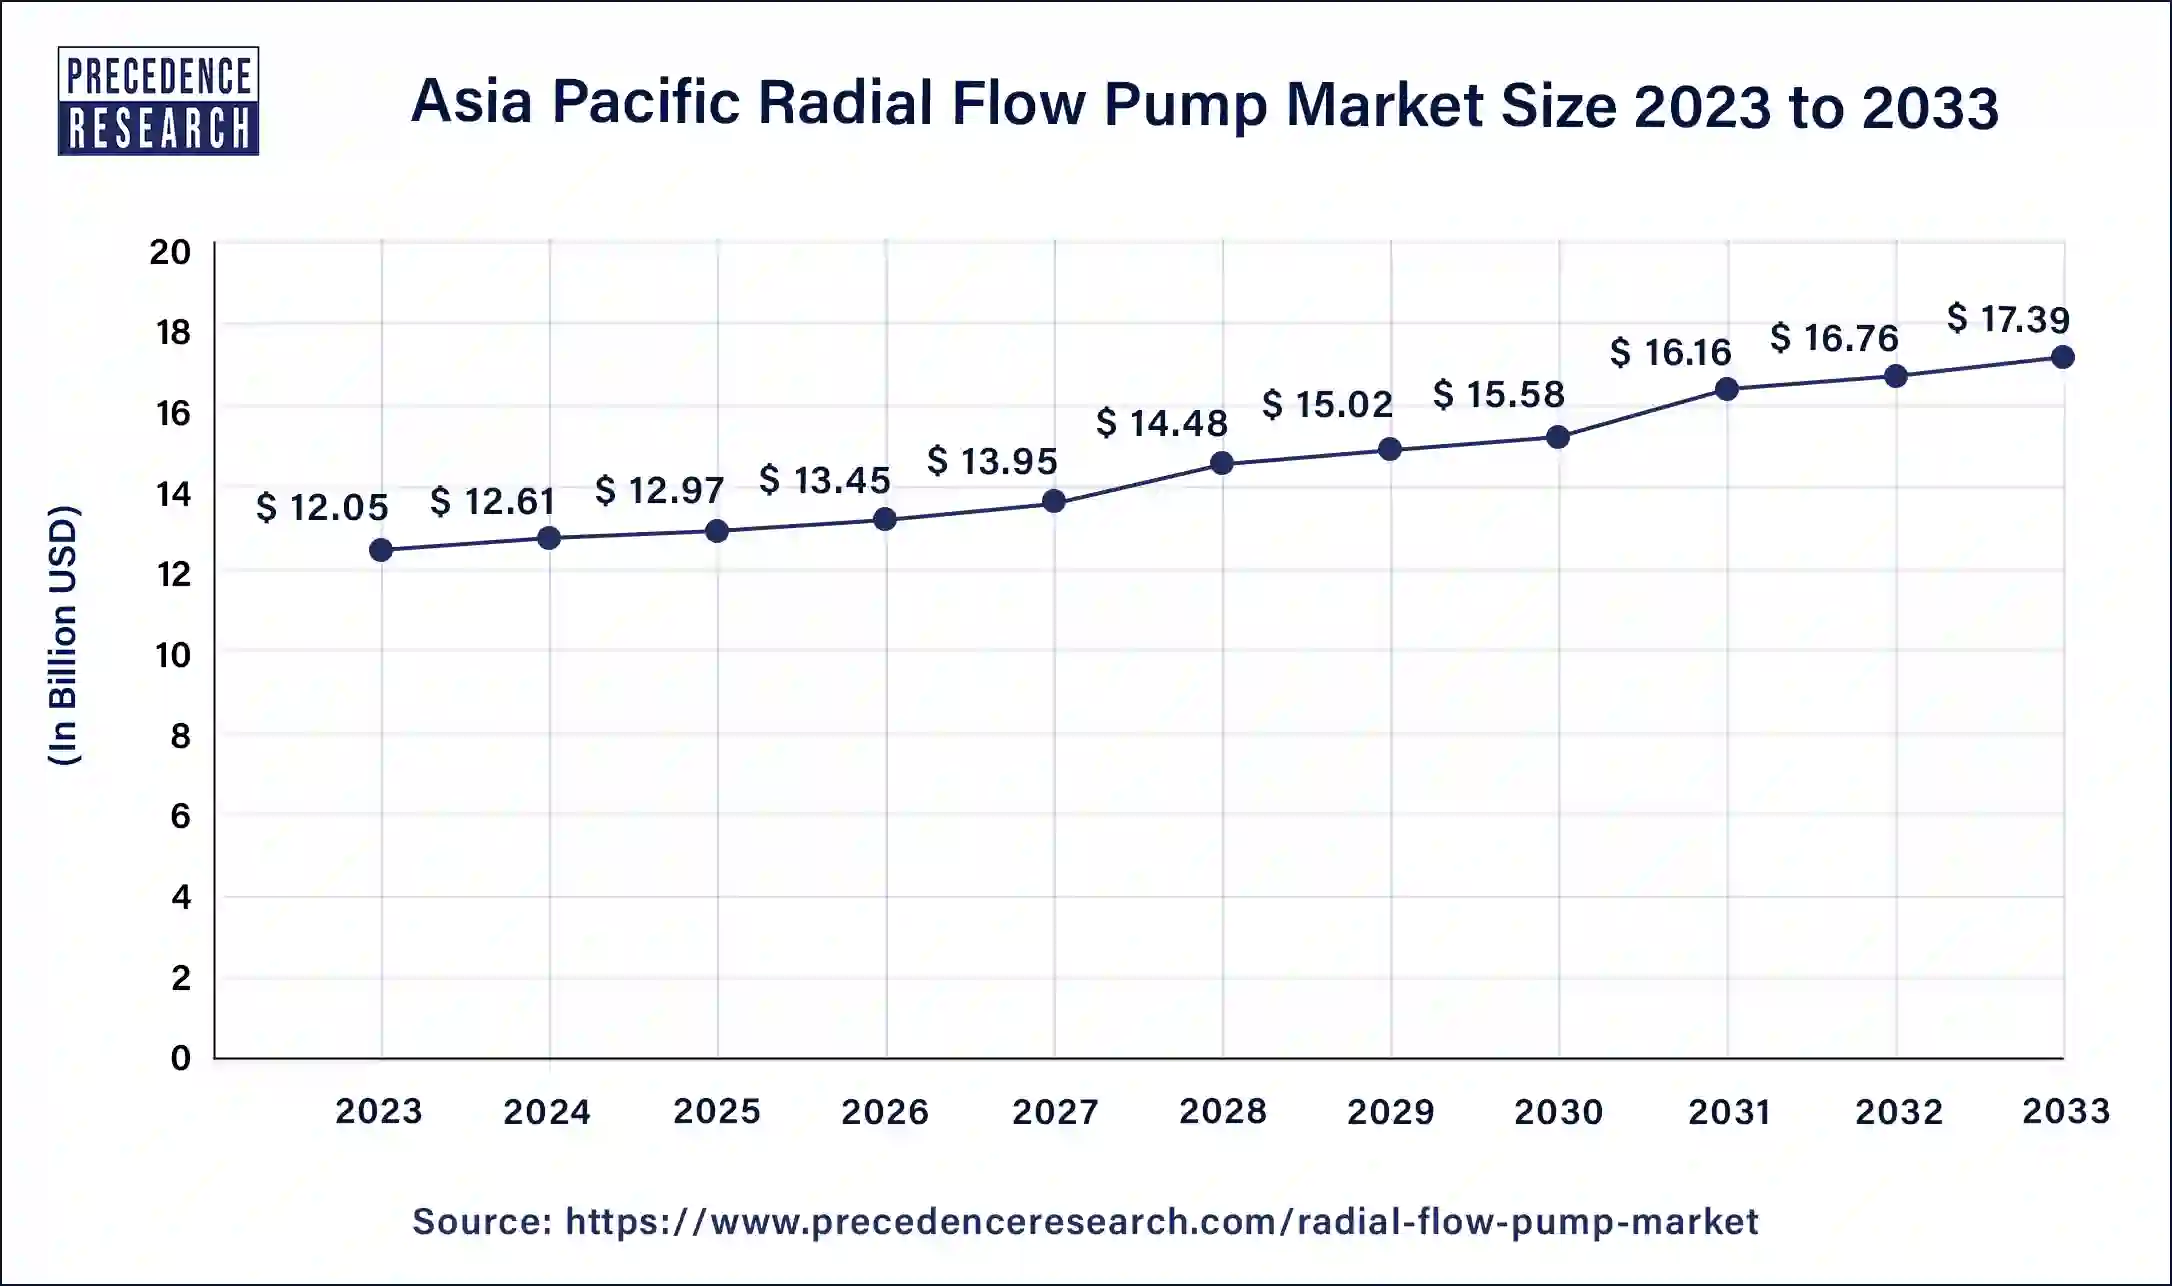 Asia Pacific Radial Flow Pump Market Size 2024 to 2033